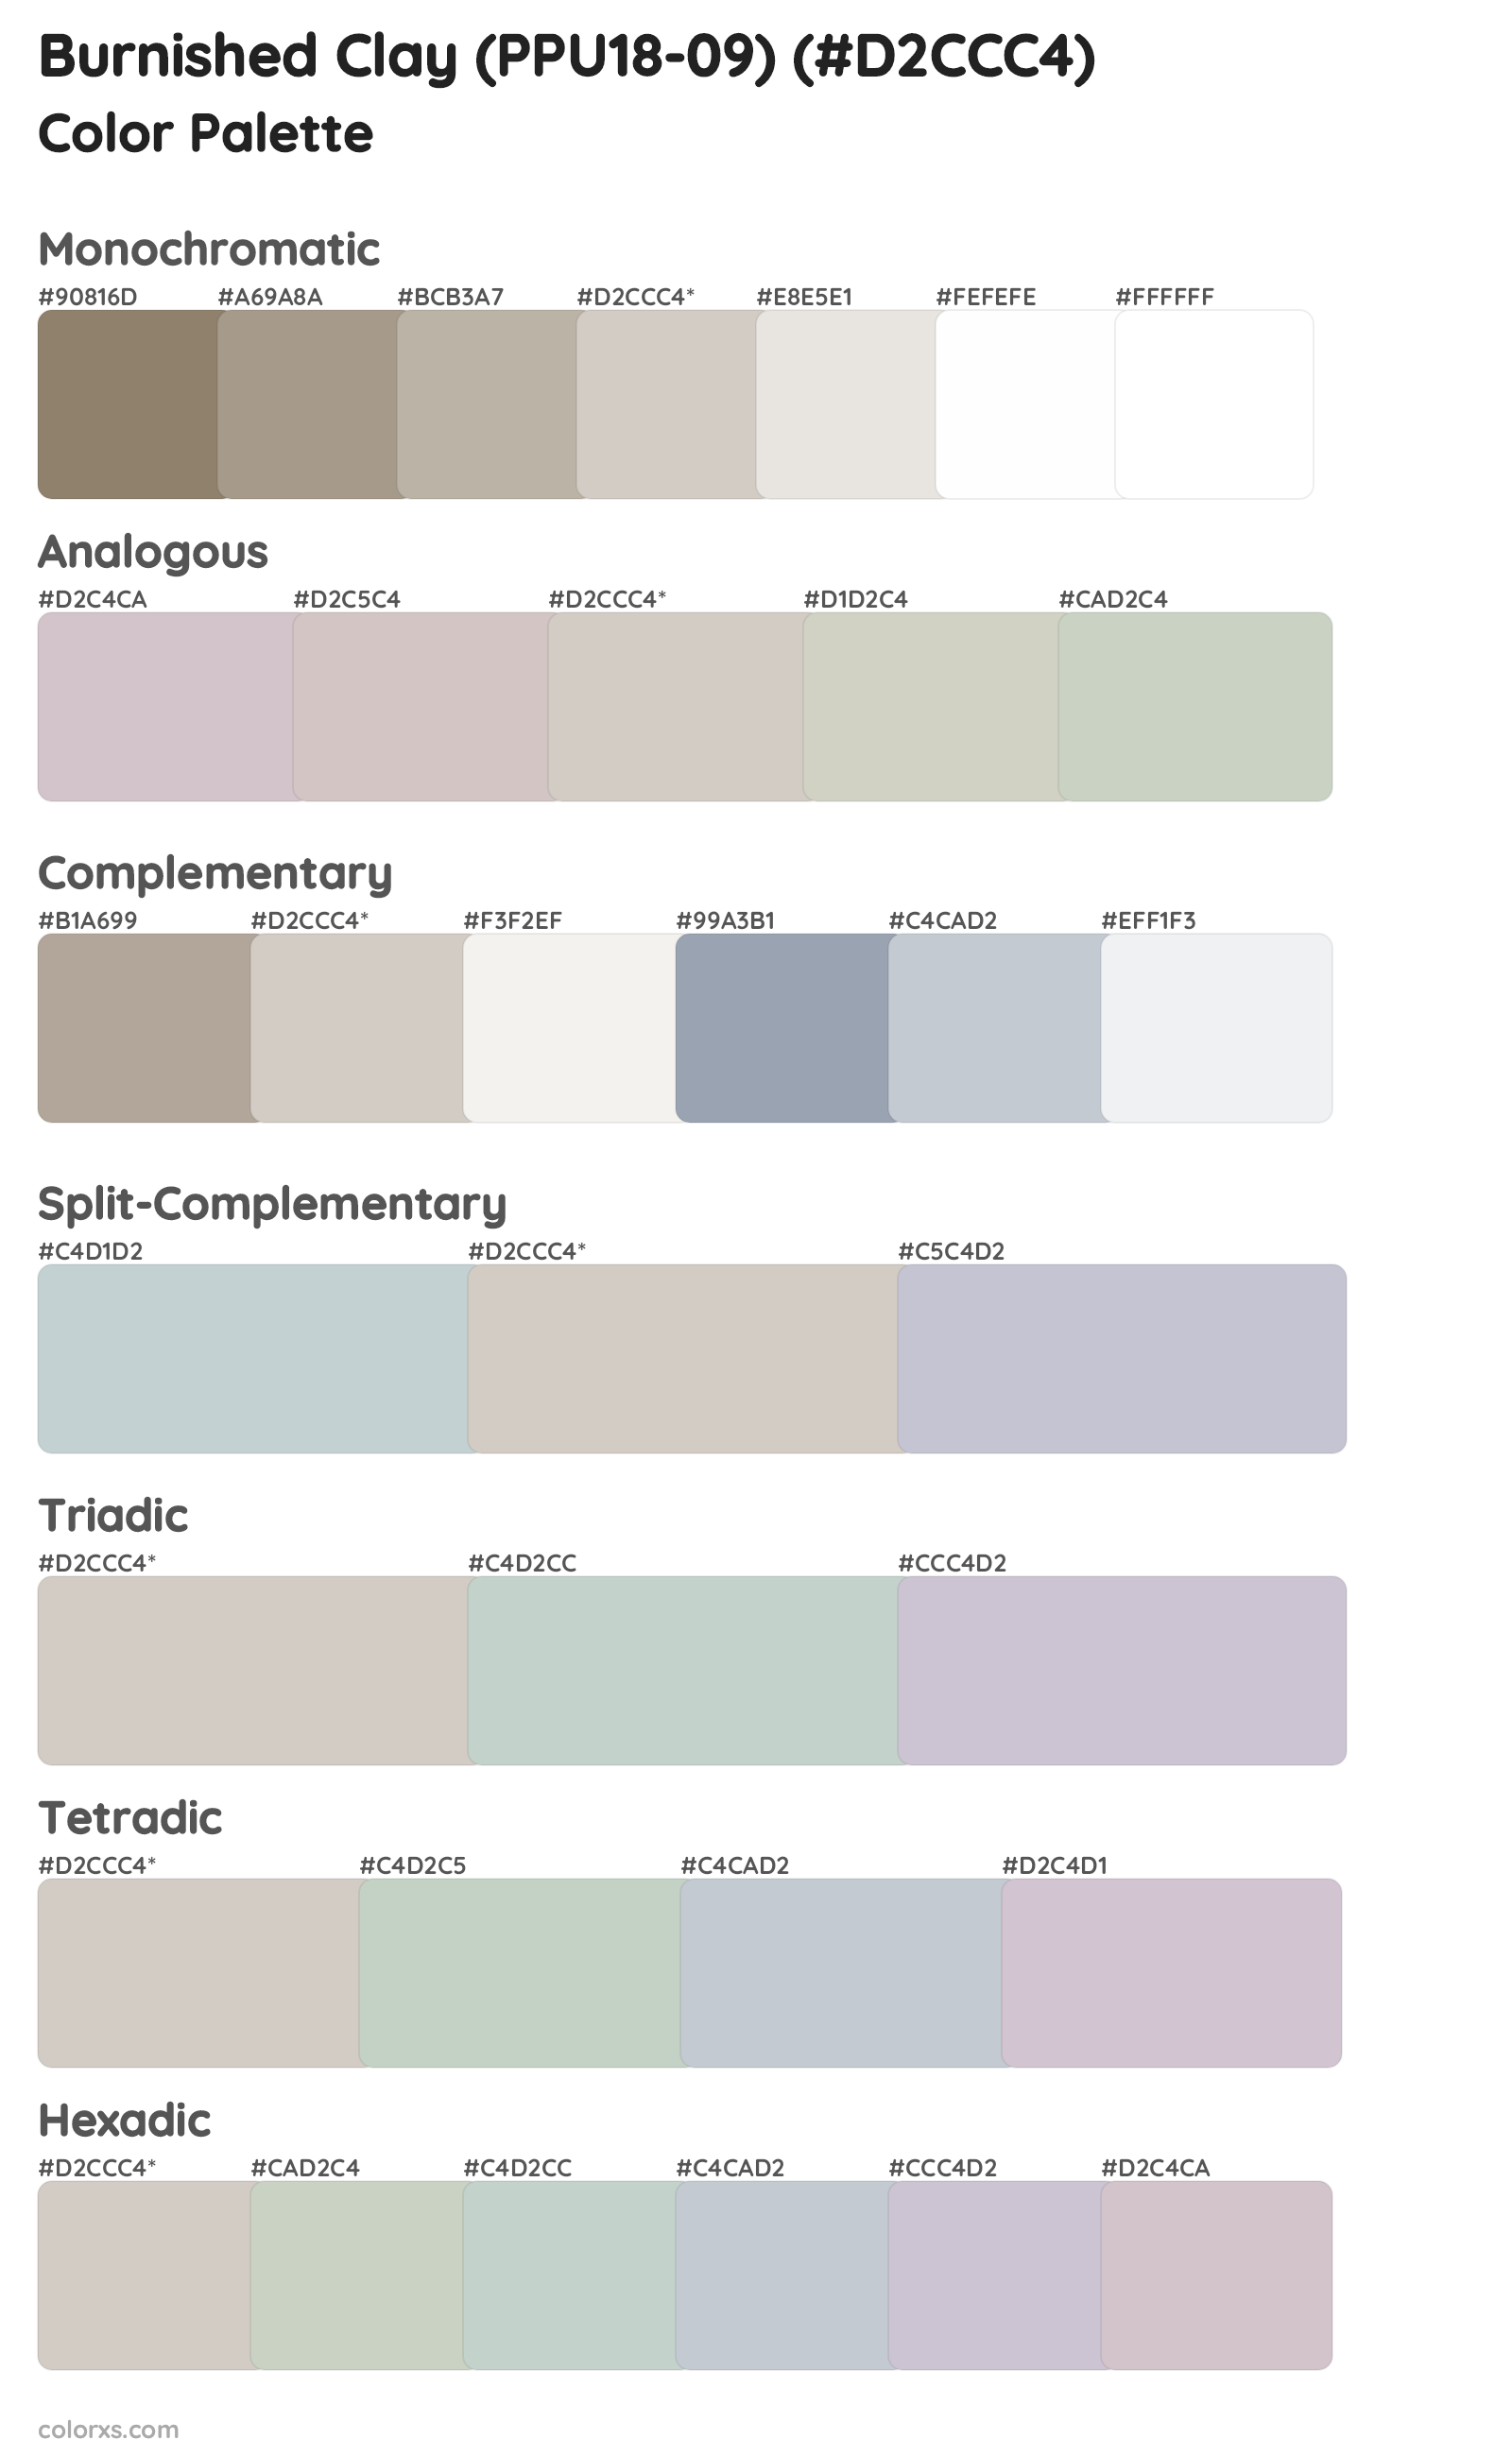 Burnished Clay (PPU18-09) Color Scheme Palettes